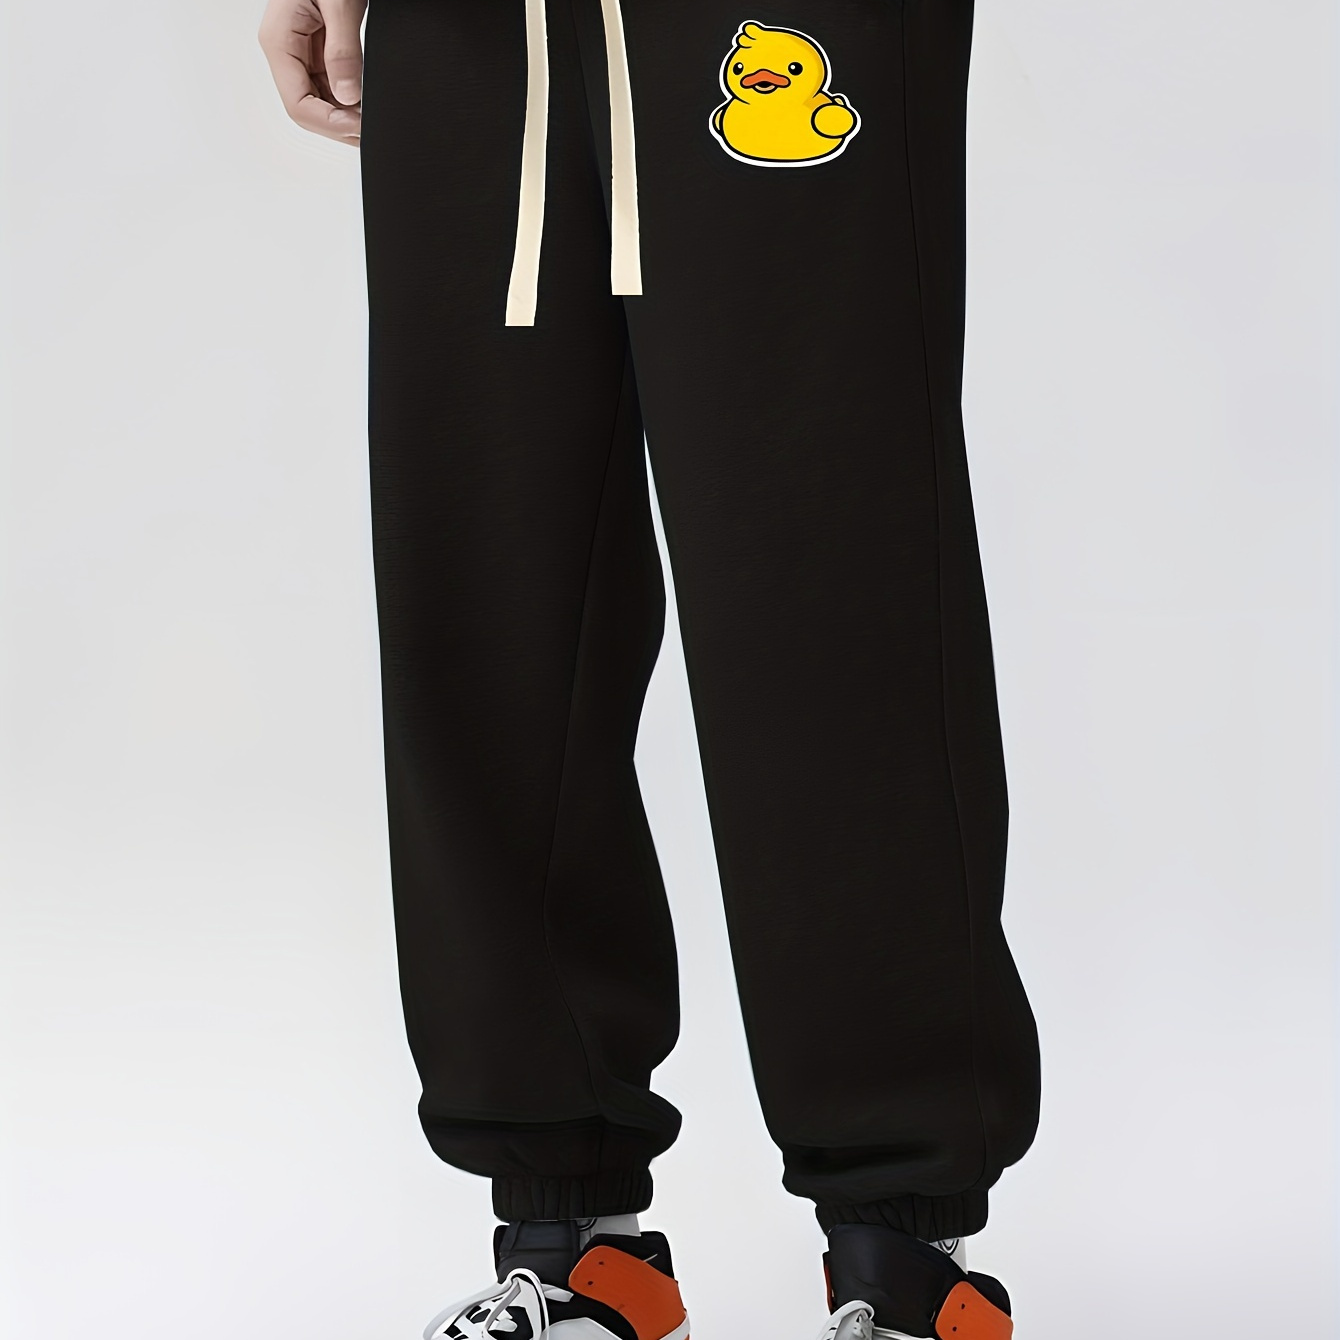 

Rubber Duck Pattern Joggers With Pockets, Men's Casual Pants For Spring And Fall